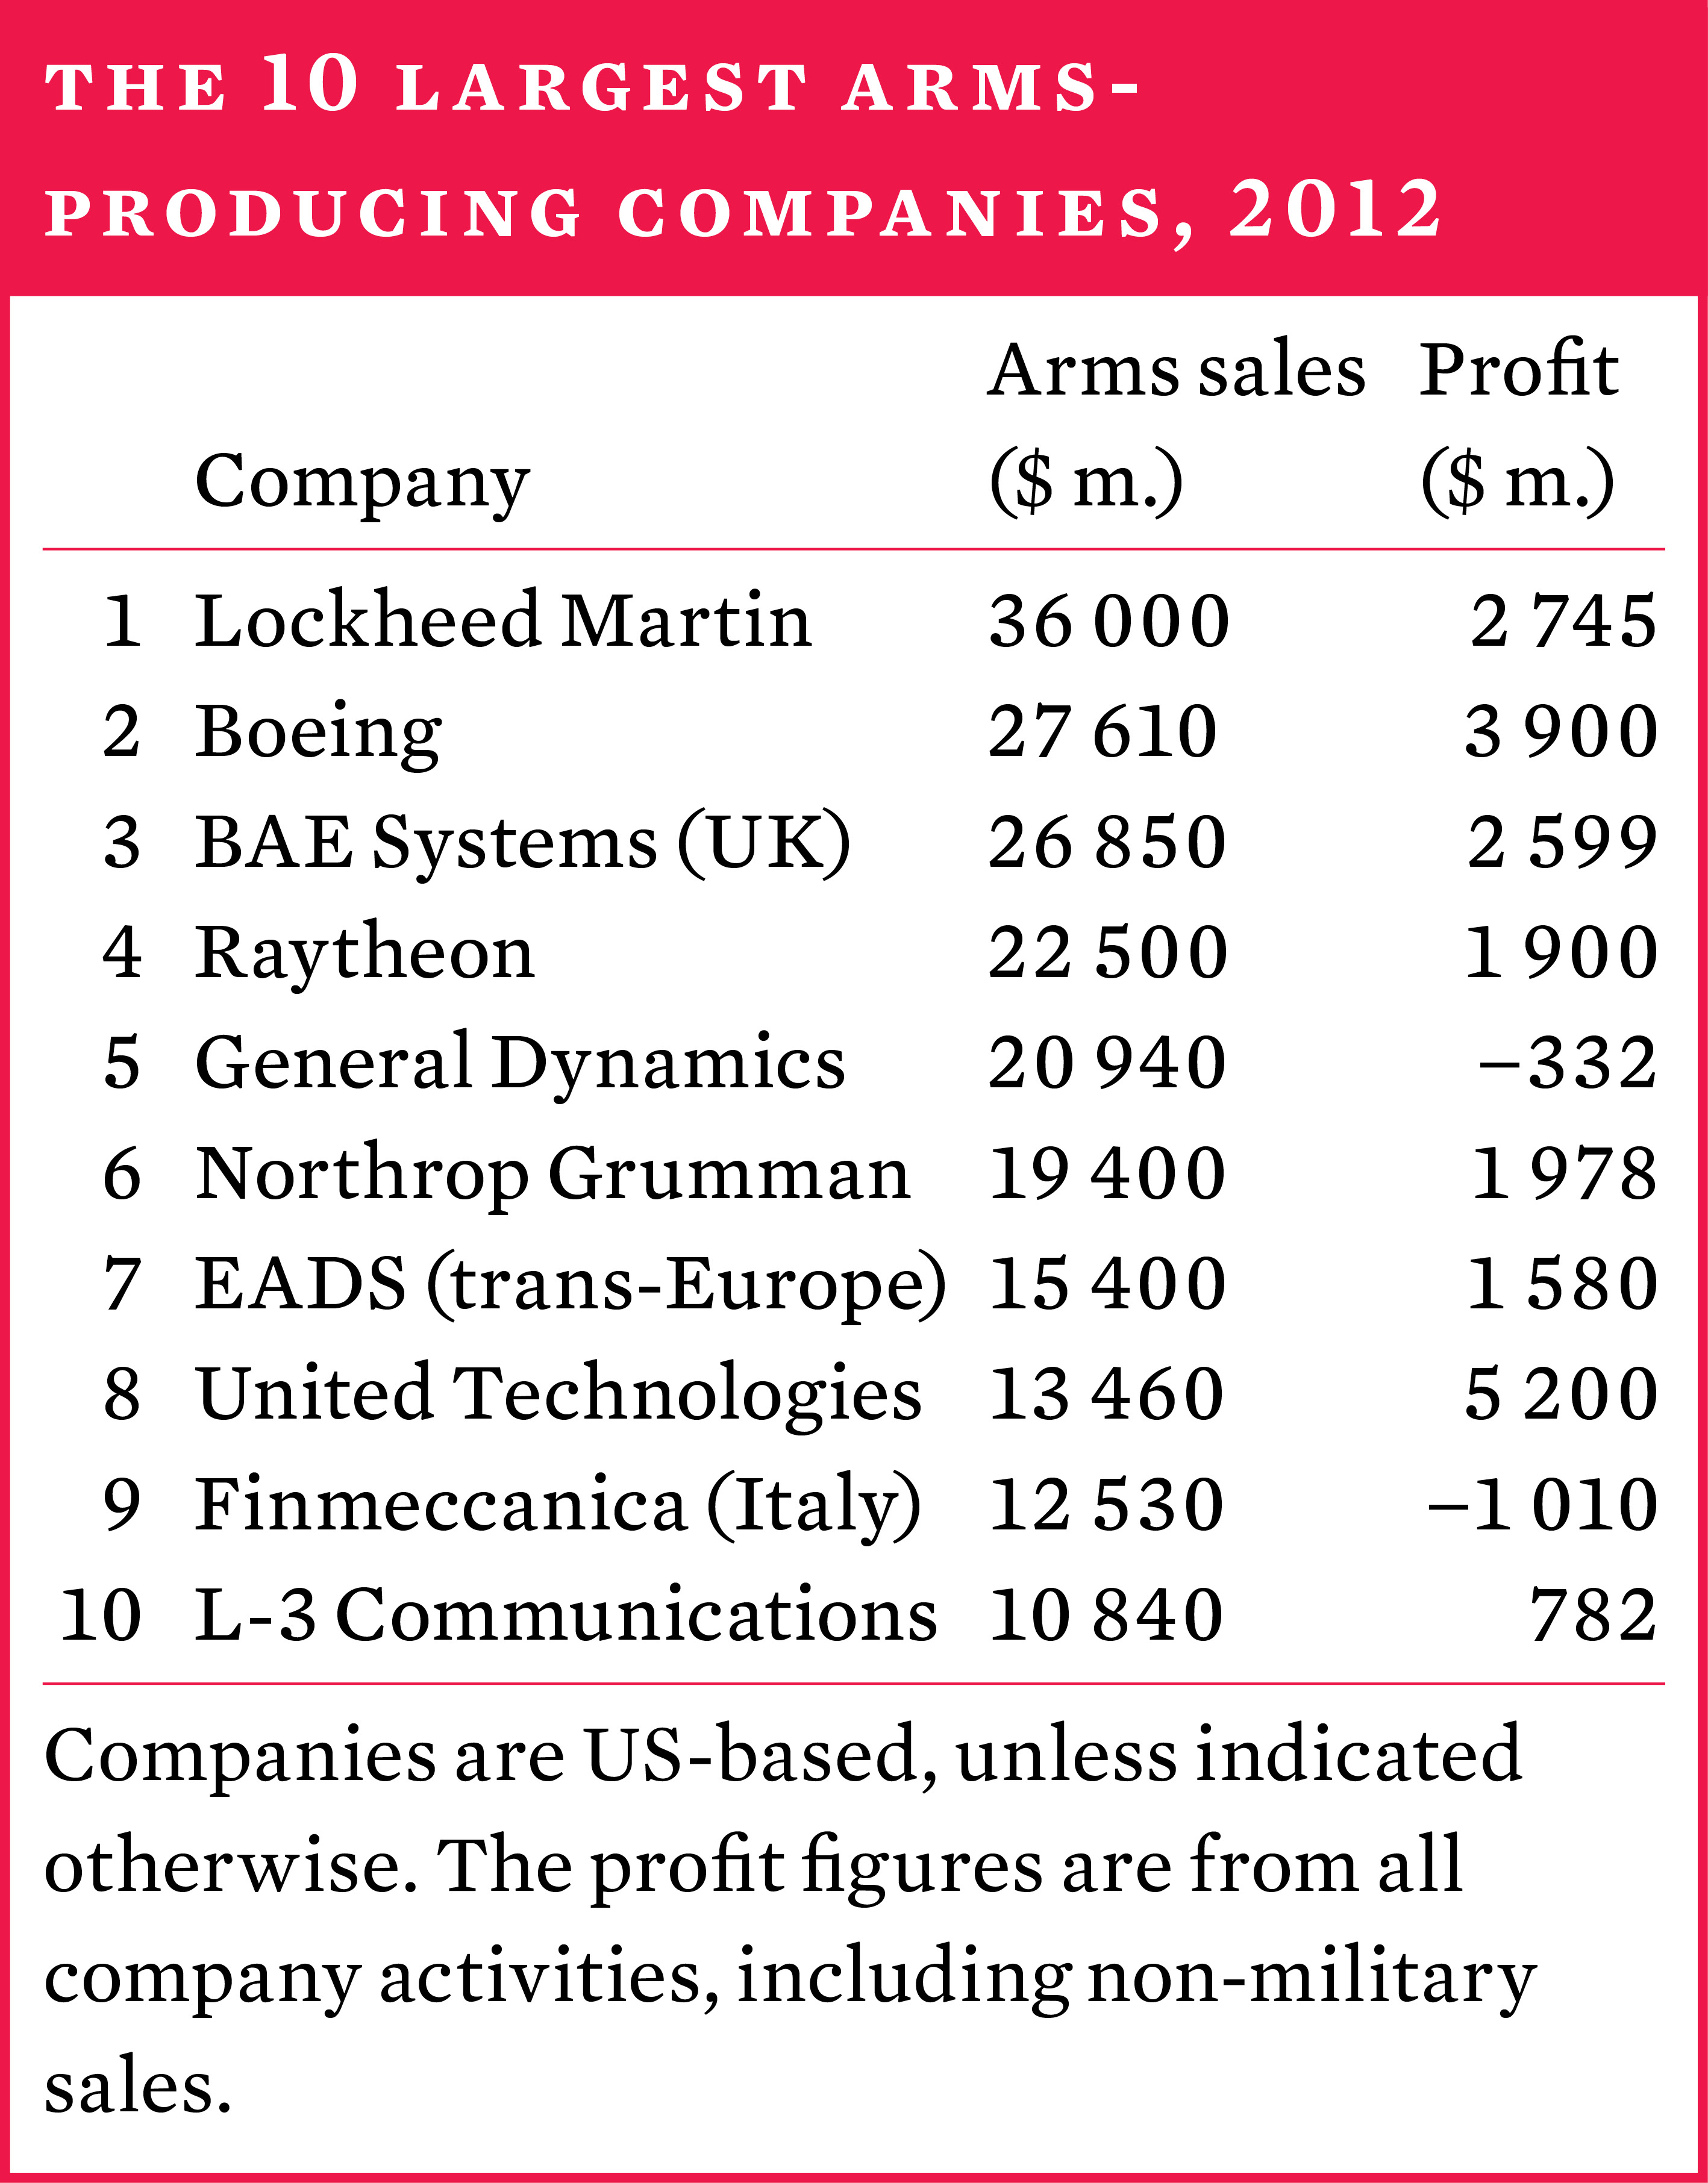 The 10 largest arms-producing companies, 2012